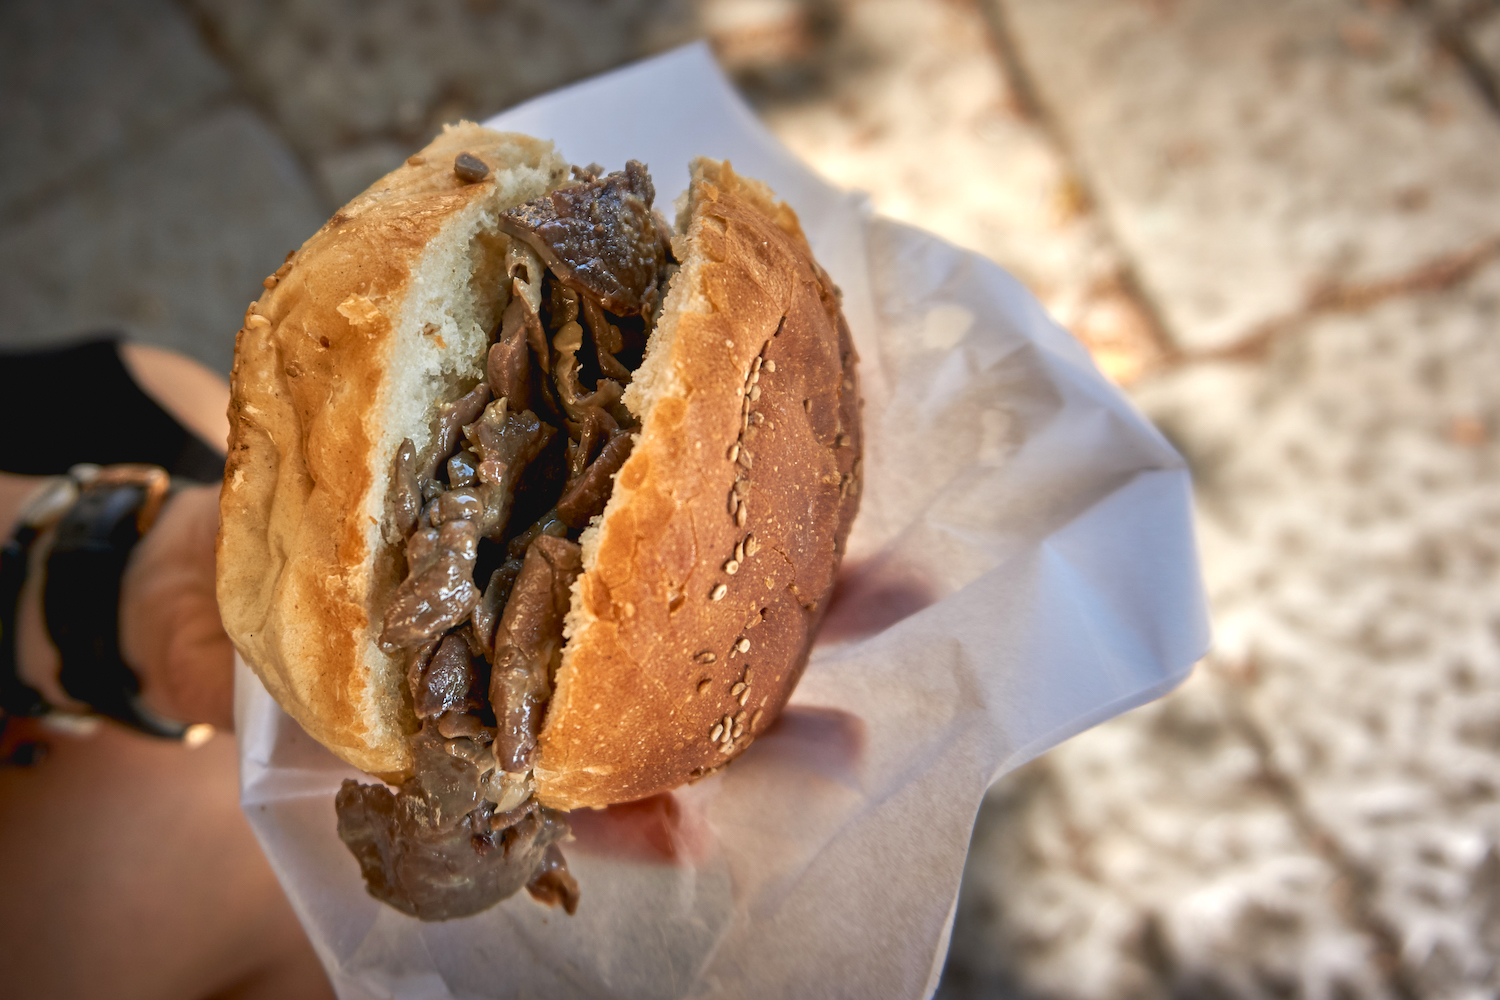 Pani ca meusa "bread with spleen", a street food dish exclusively typical of Palermo